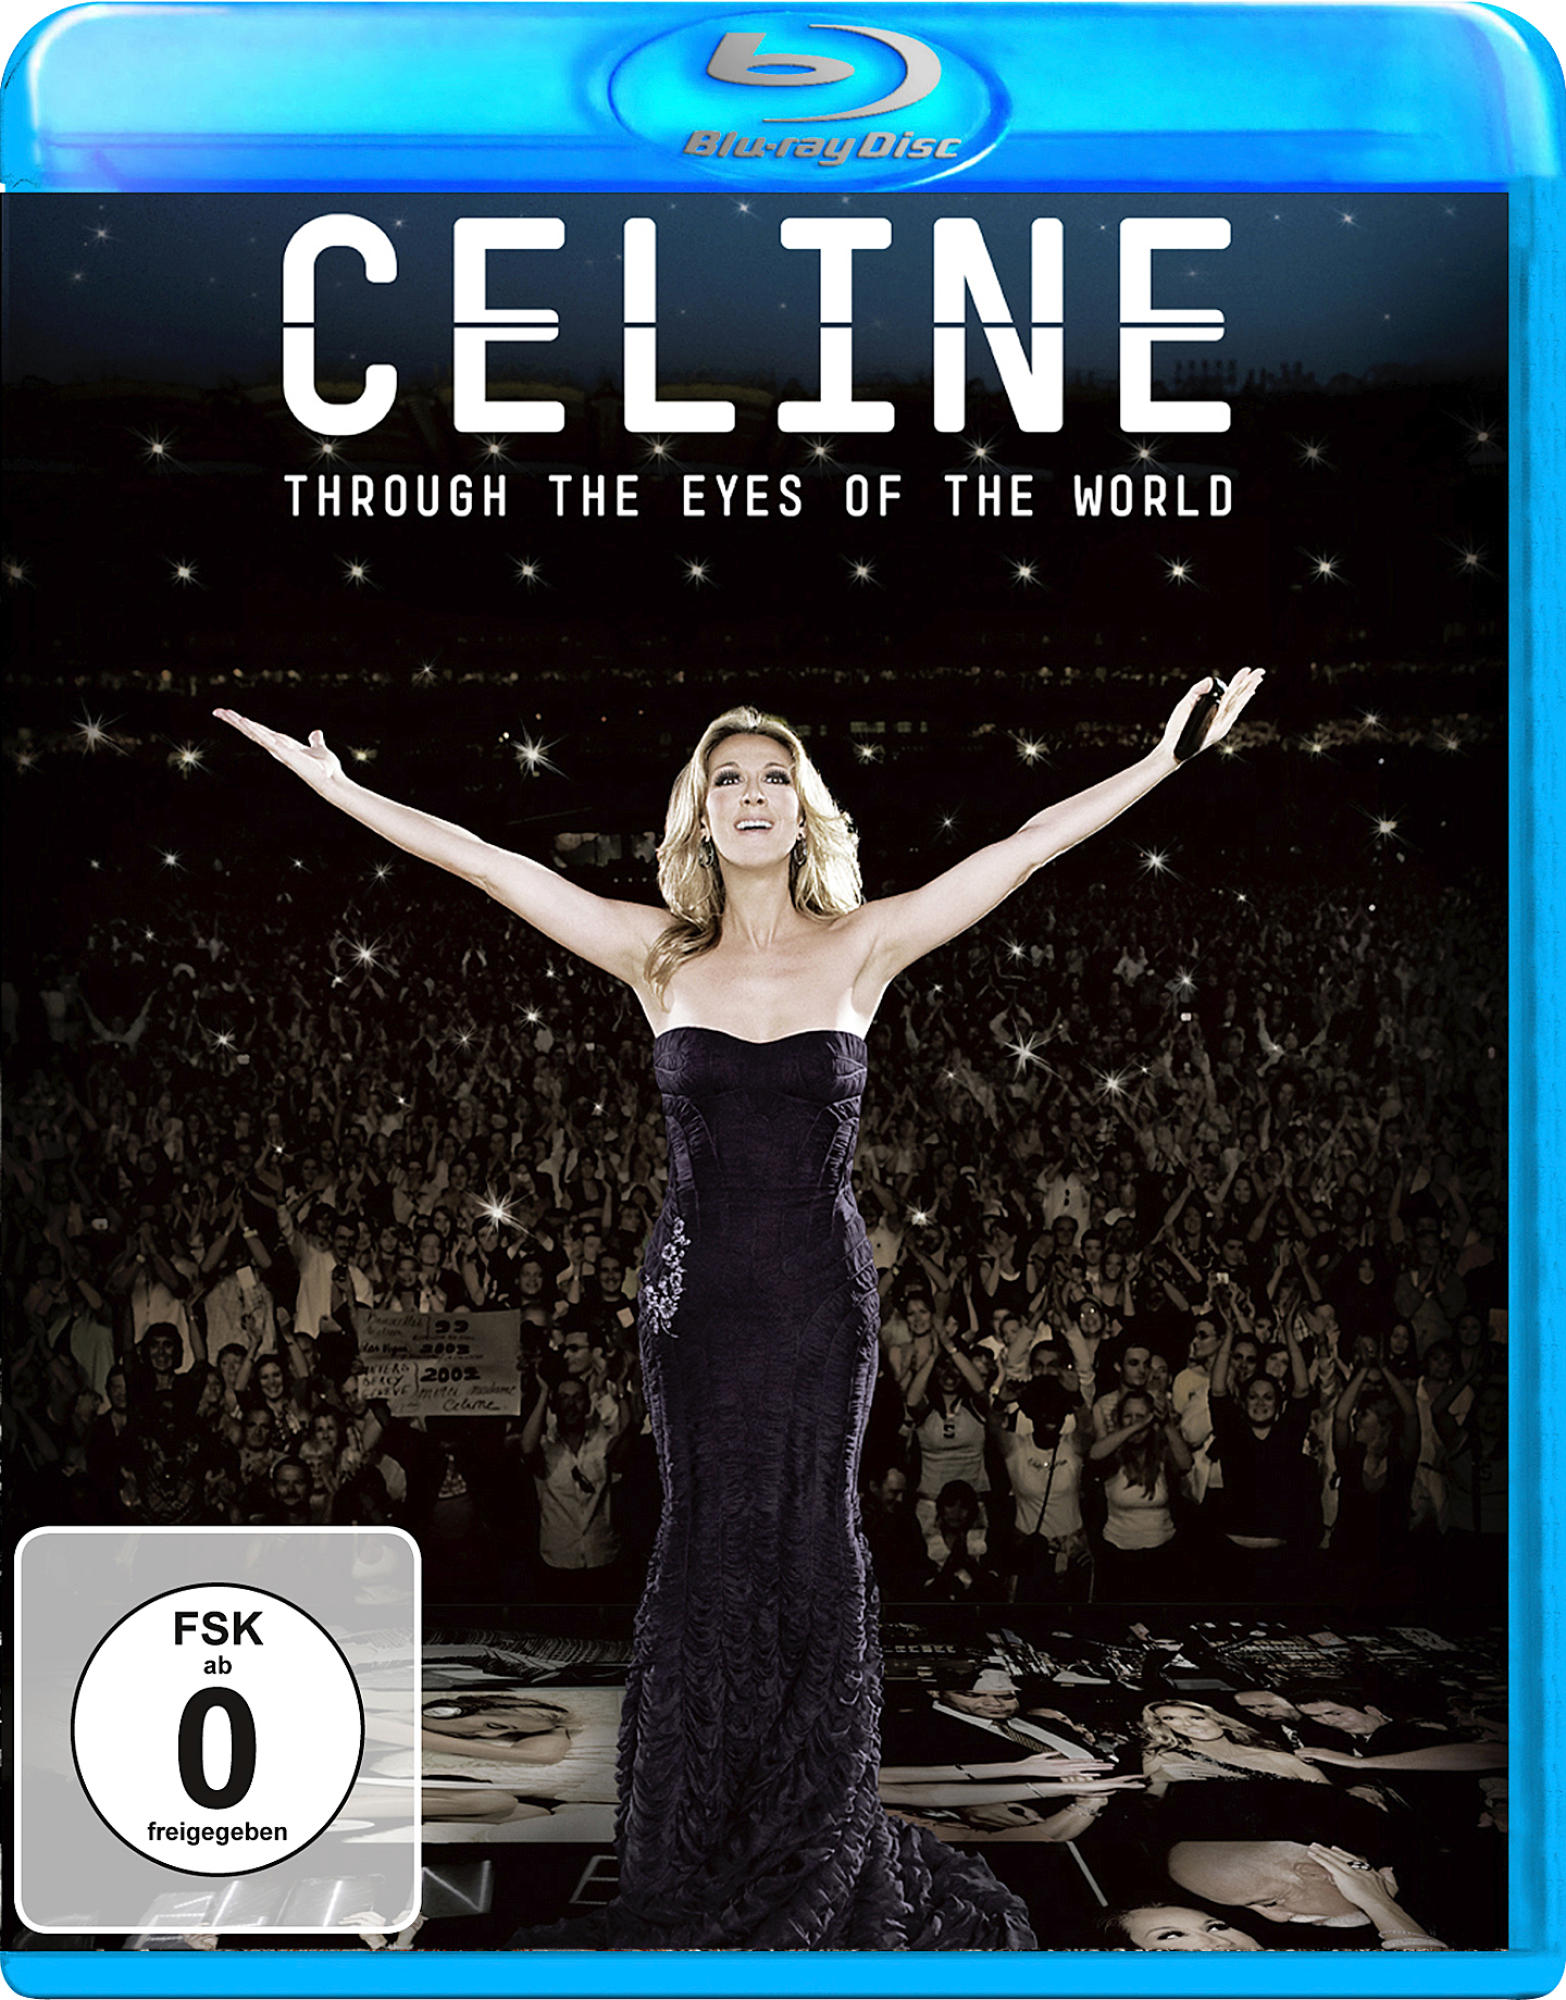 Céline Dion - OF THE (Blu-ray) - EYES WORLD THE THROUGH